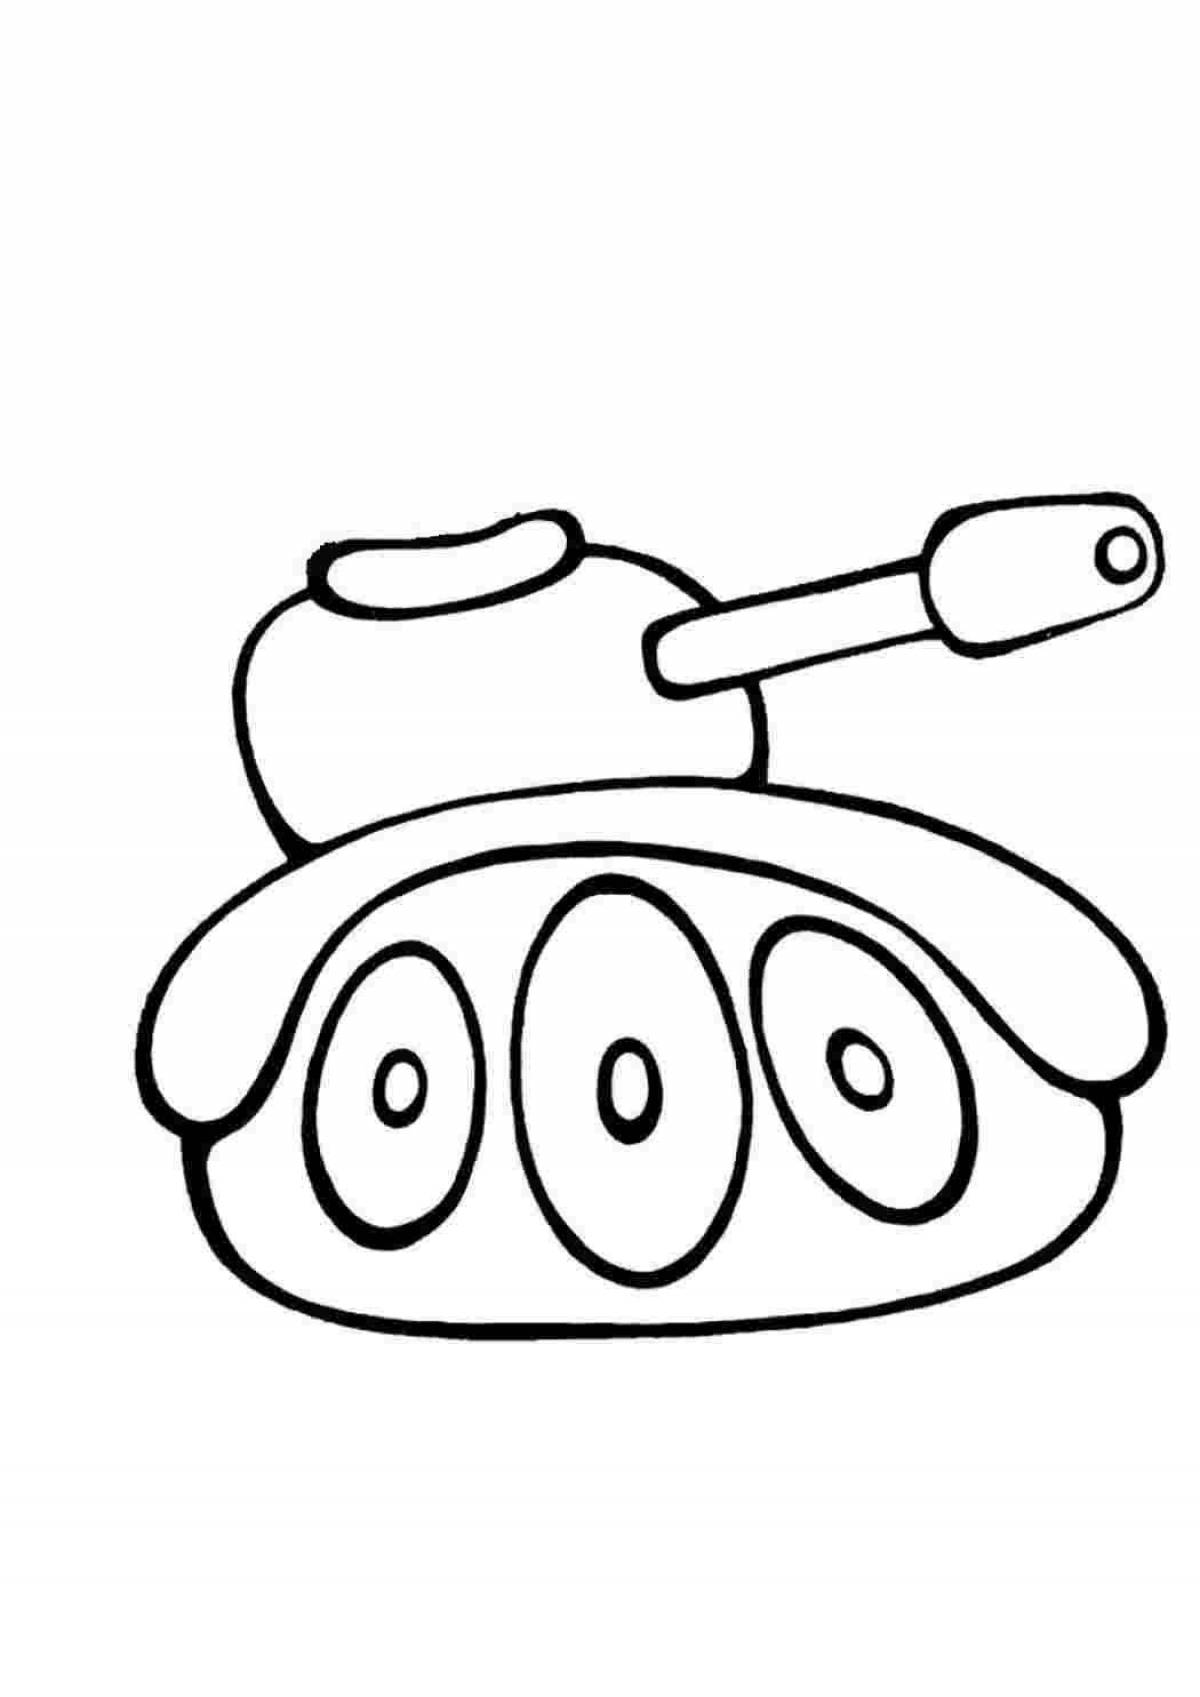 Wonderful tank coloring book for 4-5 year olds